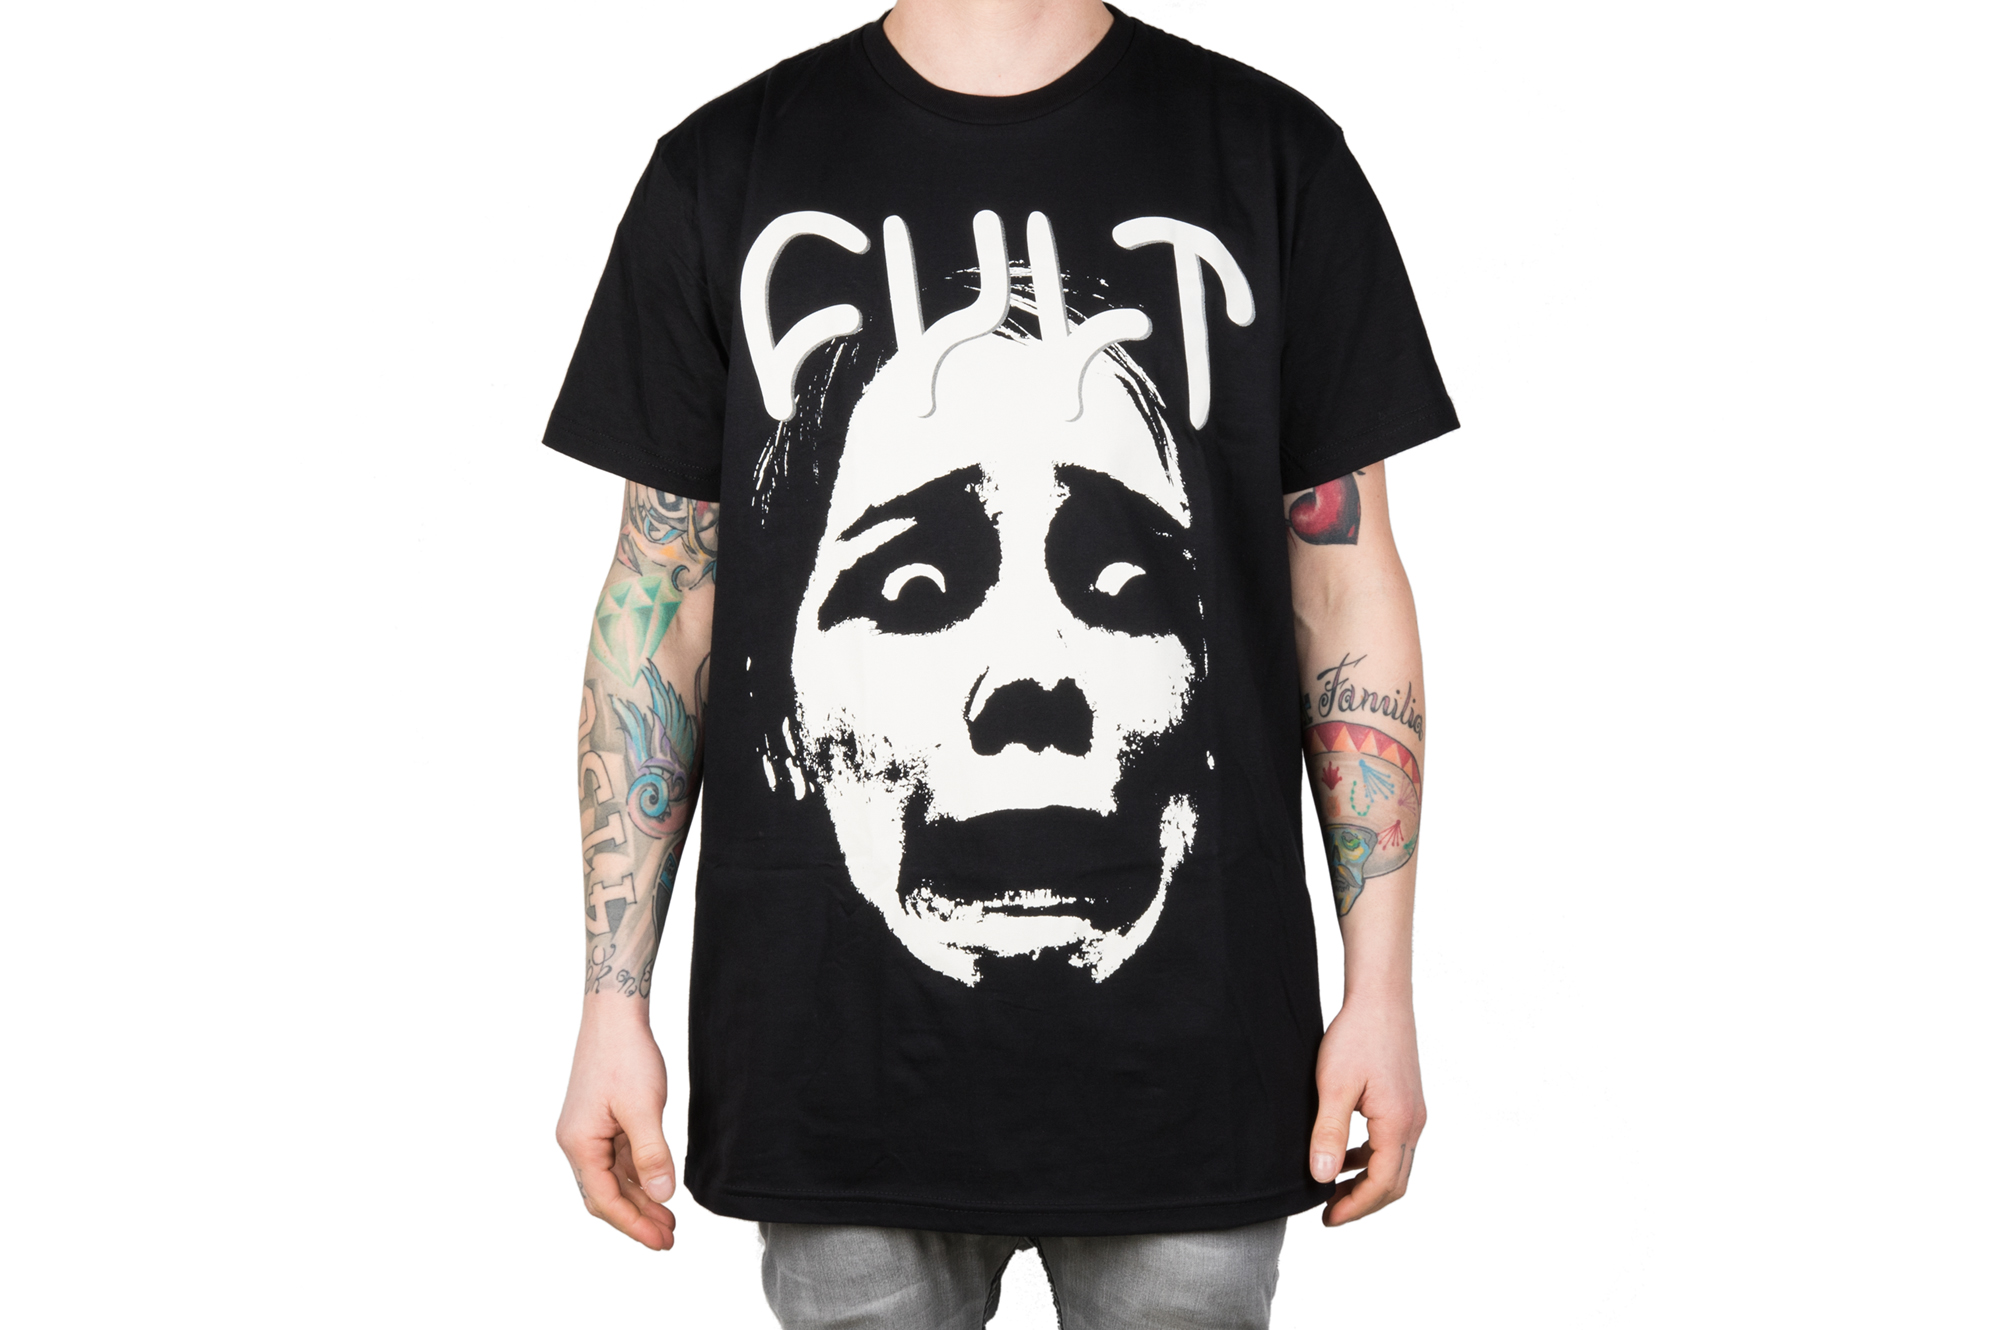 Cult "Face Logo" T-Shirt buy online now | Oldschoolbmx BMX and Mailorder